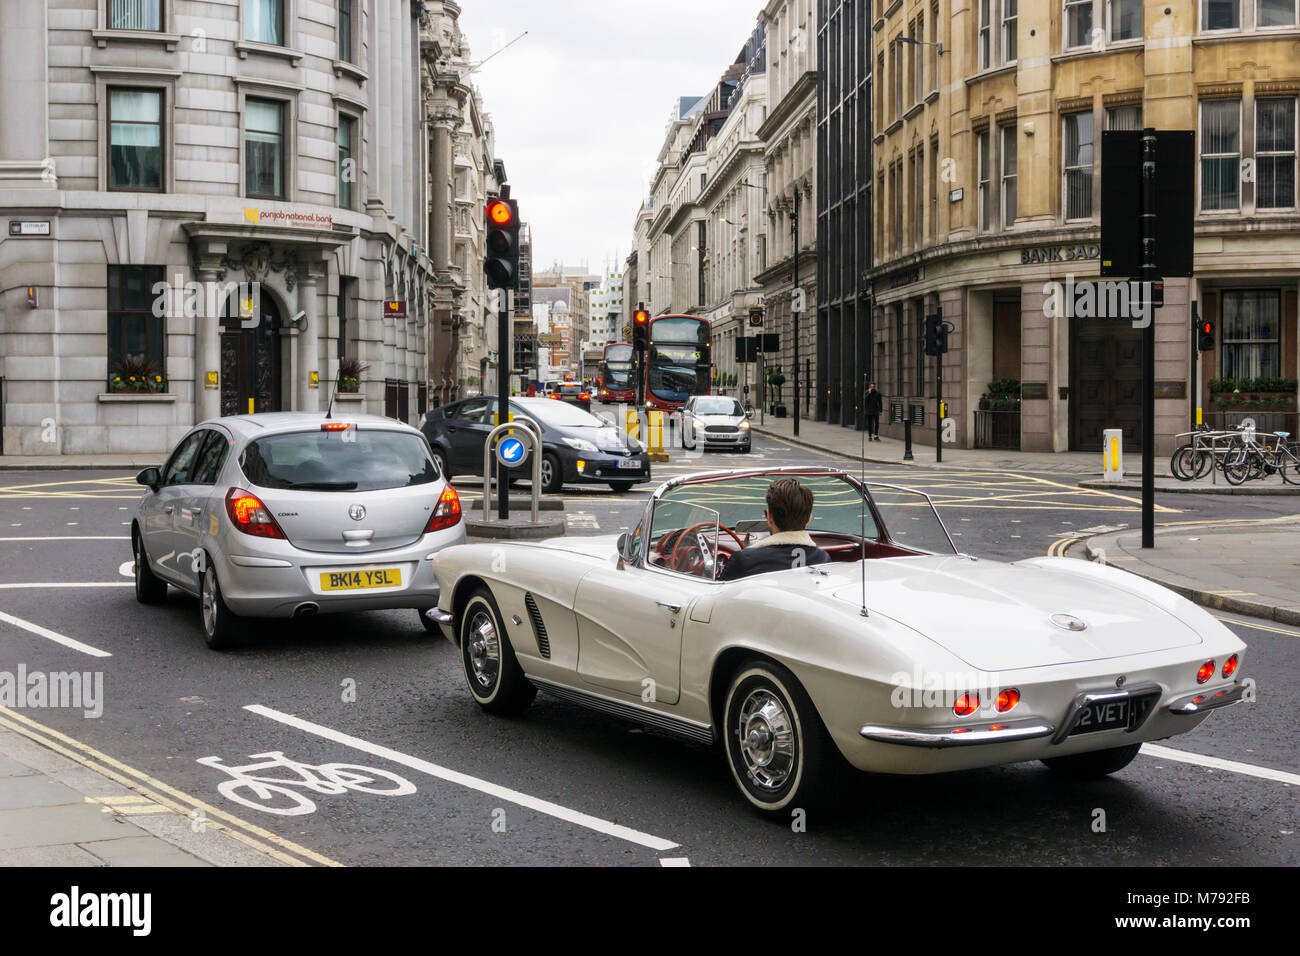 A white left-hand drive Chevrolet GMC Corvette at junction of Princes Street and Lothbury in the City of London. Stock Photo